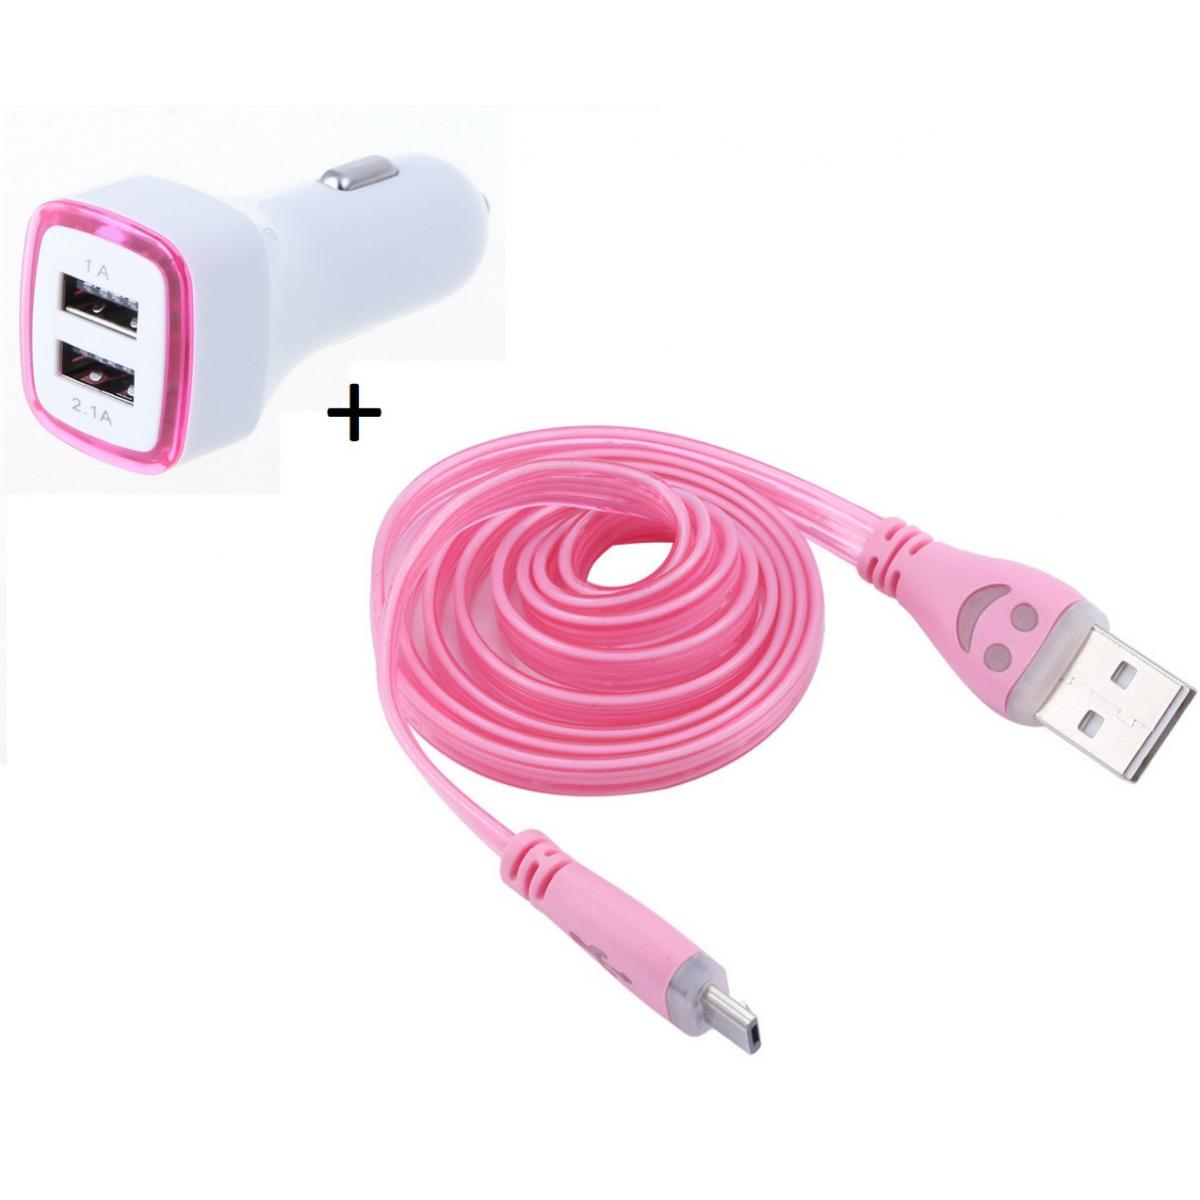 Shot - Pack Chargeur Voiture pour HUAWEI Y6s Smartphone Micro USB (Cable Smiley + Double Adaptateur LED Allume Cigare) (ROSE) - Chargeur Voiture 12V